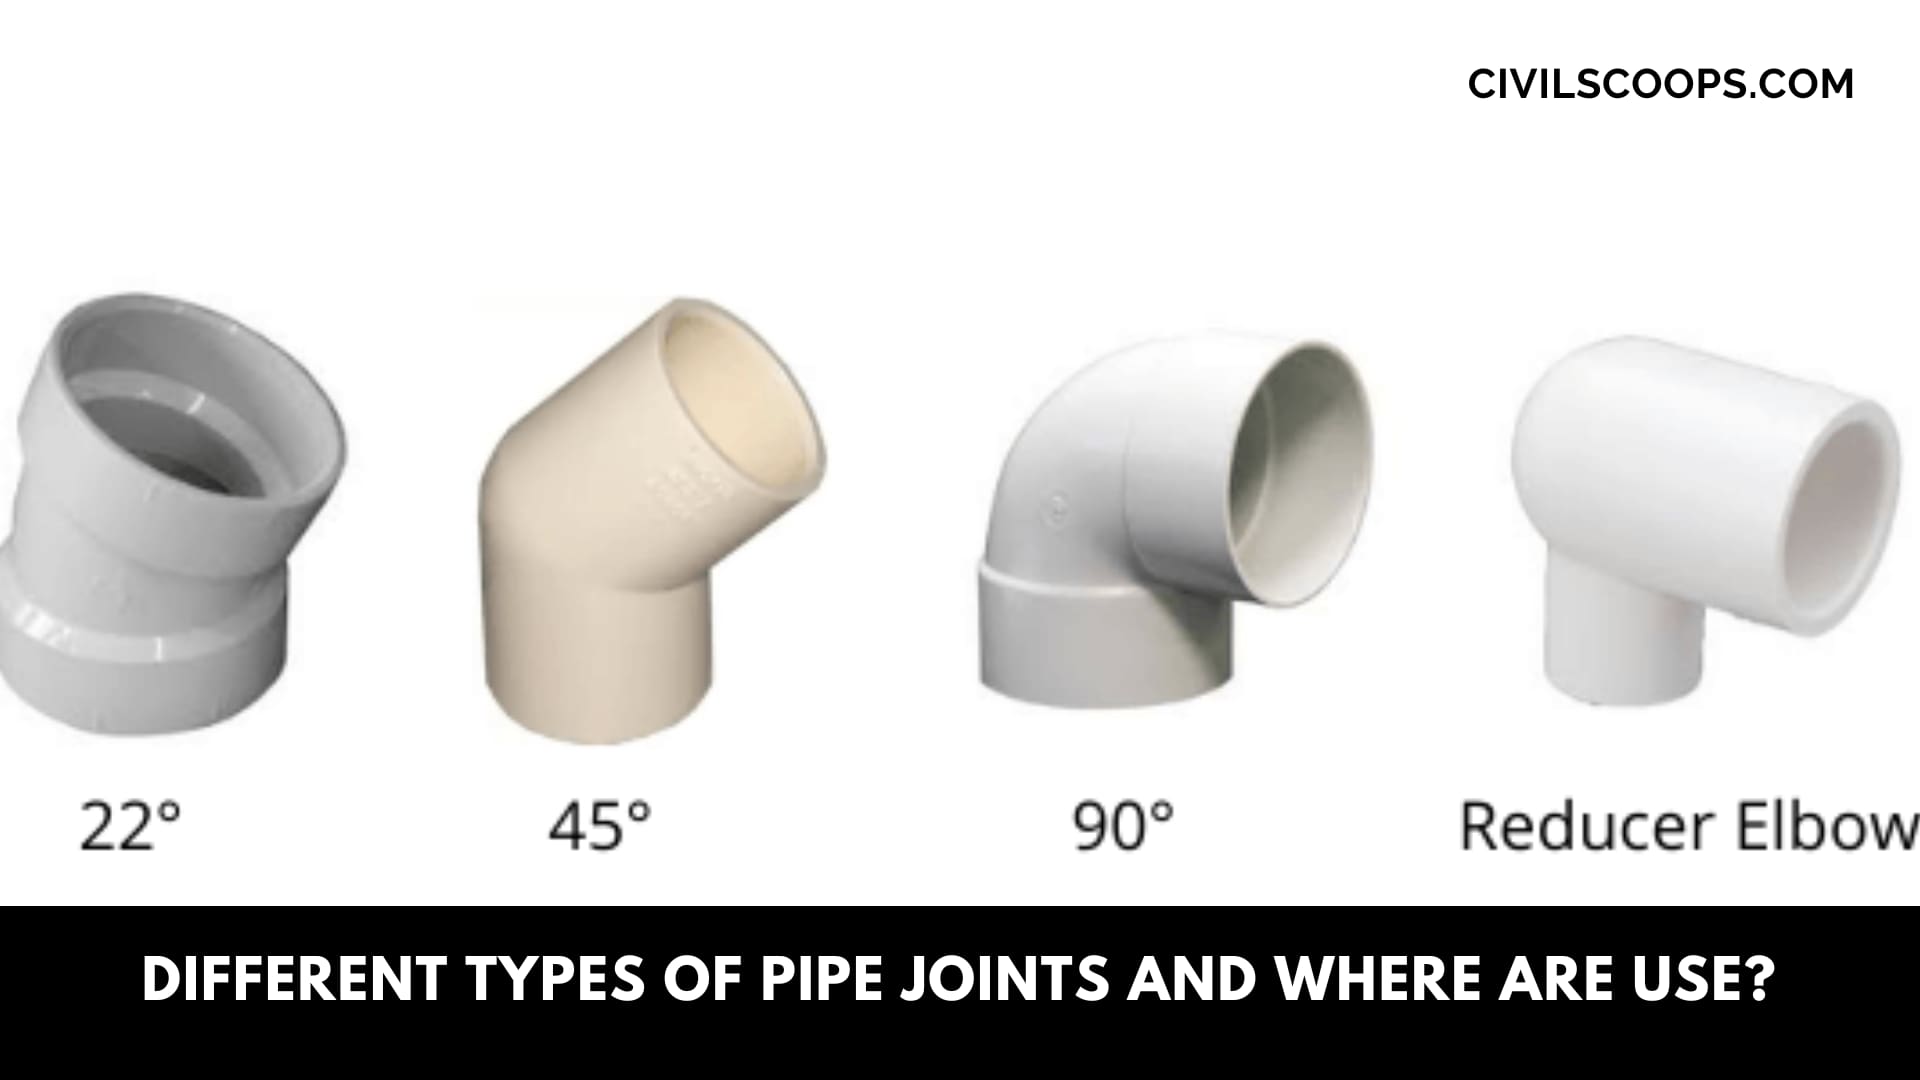 Different Types of Pipe Joints and Where Are Use?